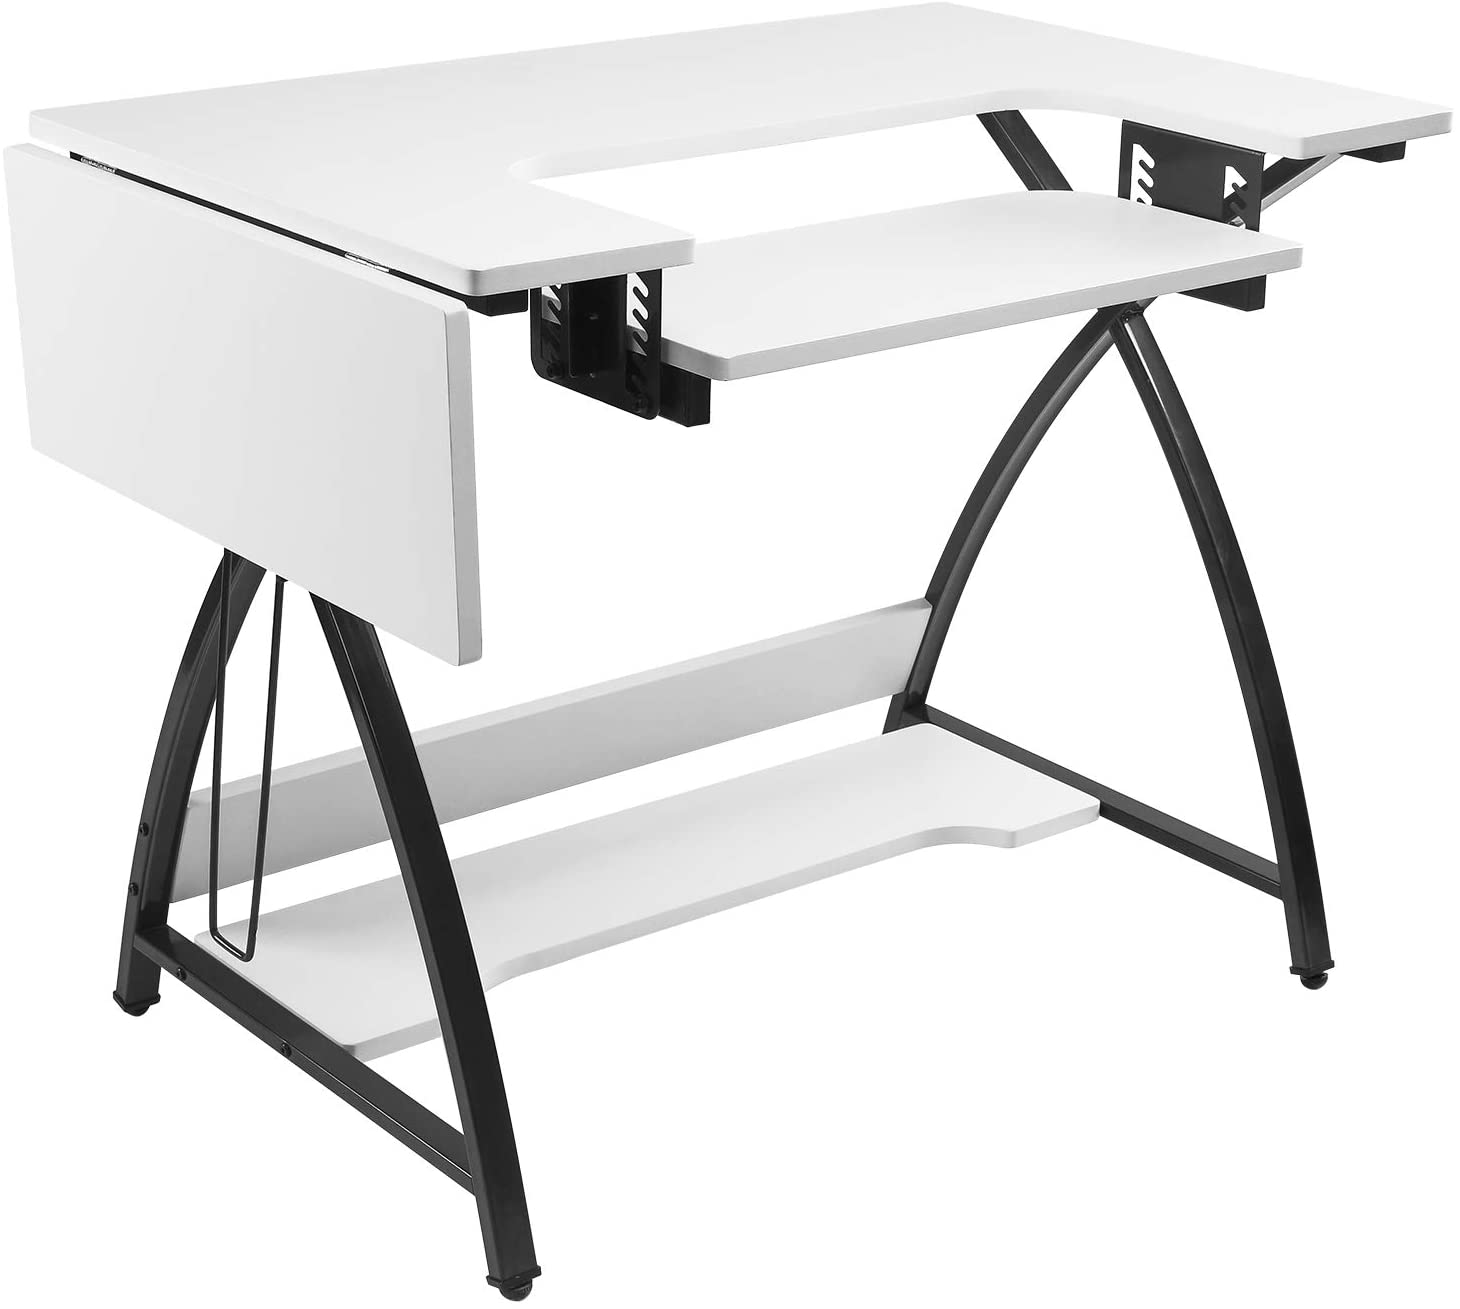 BAHOM Adjustable Sewing Craft Table